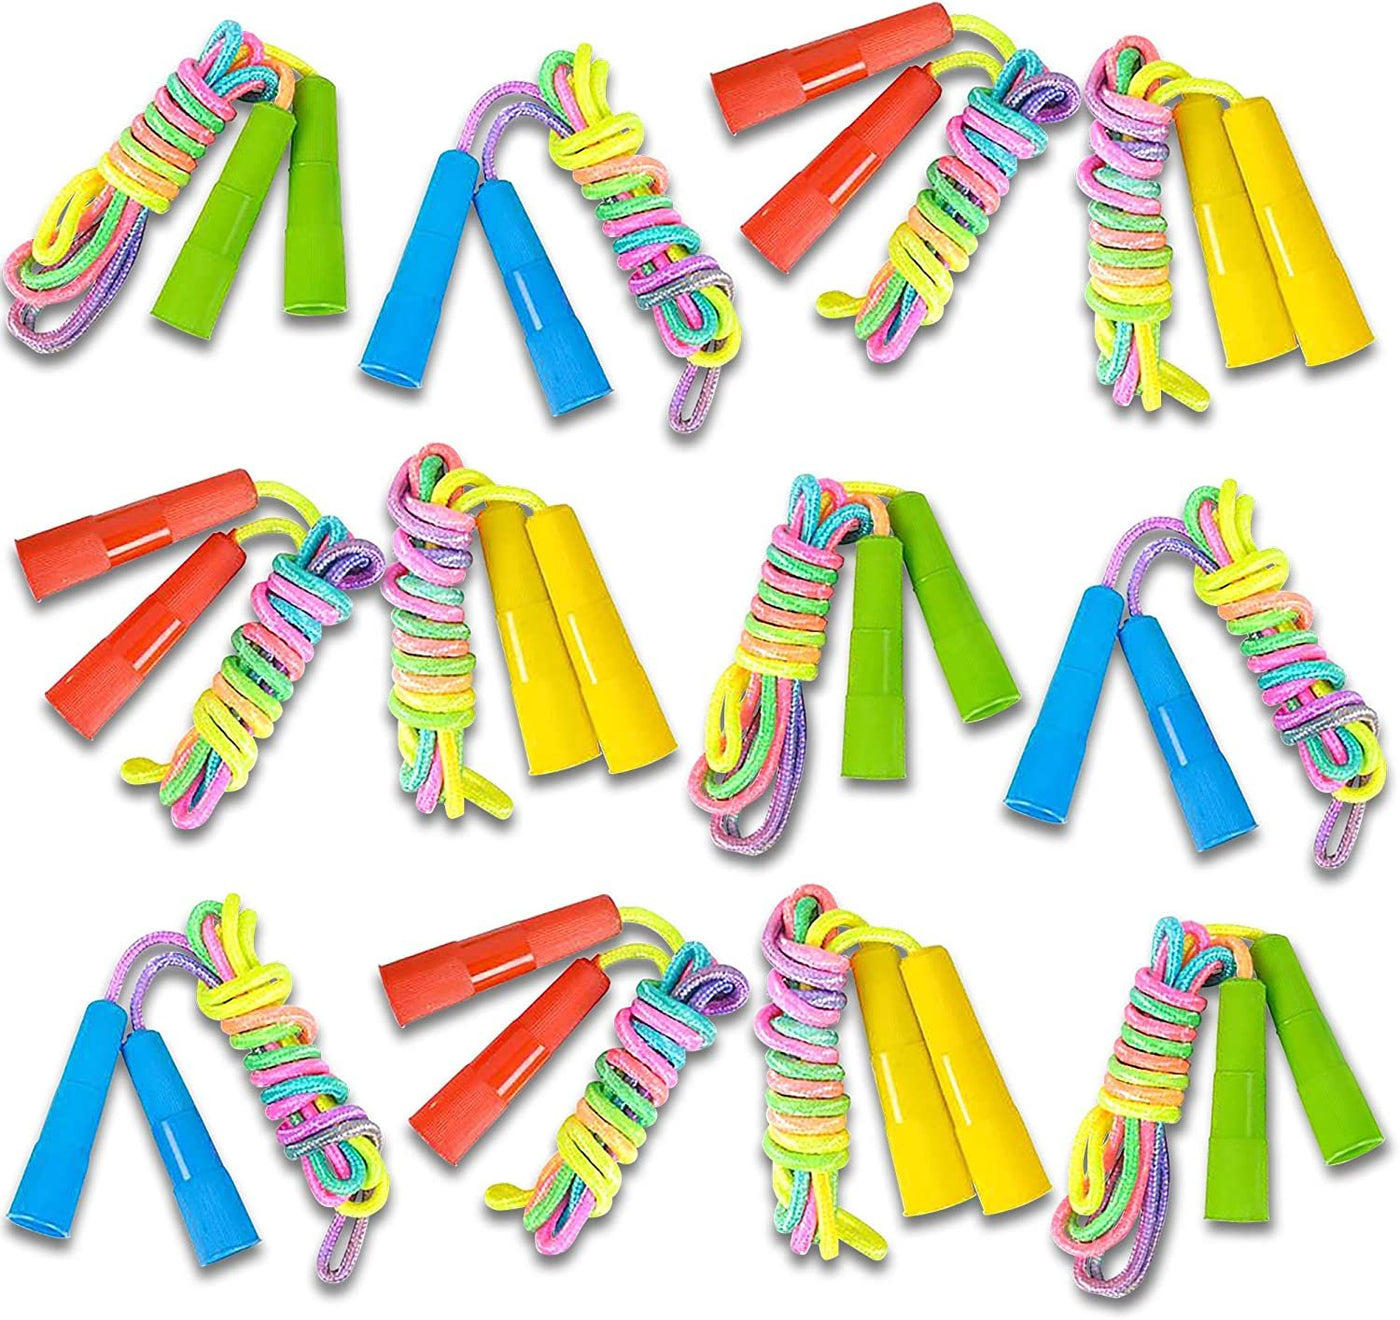 ArtCreativity 7.5ft Rainbow Jump Rope Set - 12 Pack - Vibrant Jumping Ropes for Kids - Durable Nylon Skipping Ropes - Great Birthday Party Favors, Goodie Bag Fillers, Gift Idea for Boys and Girls